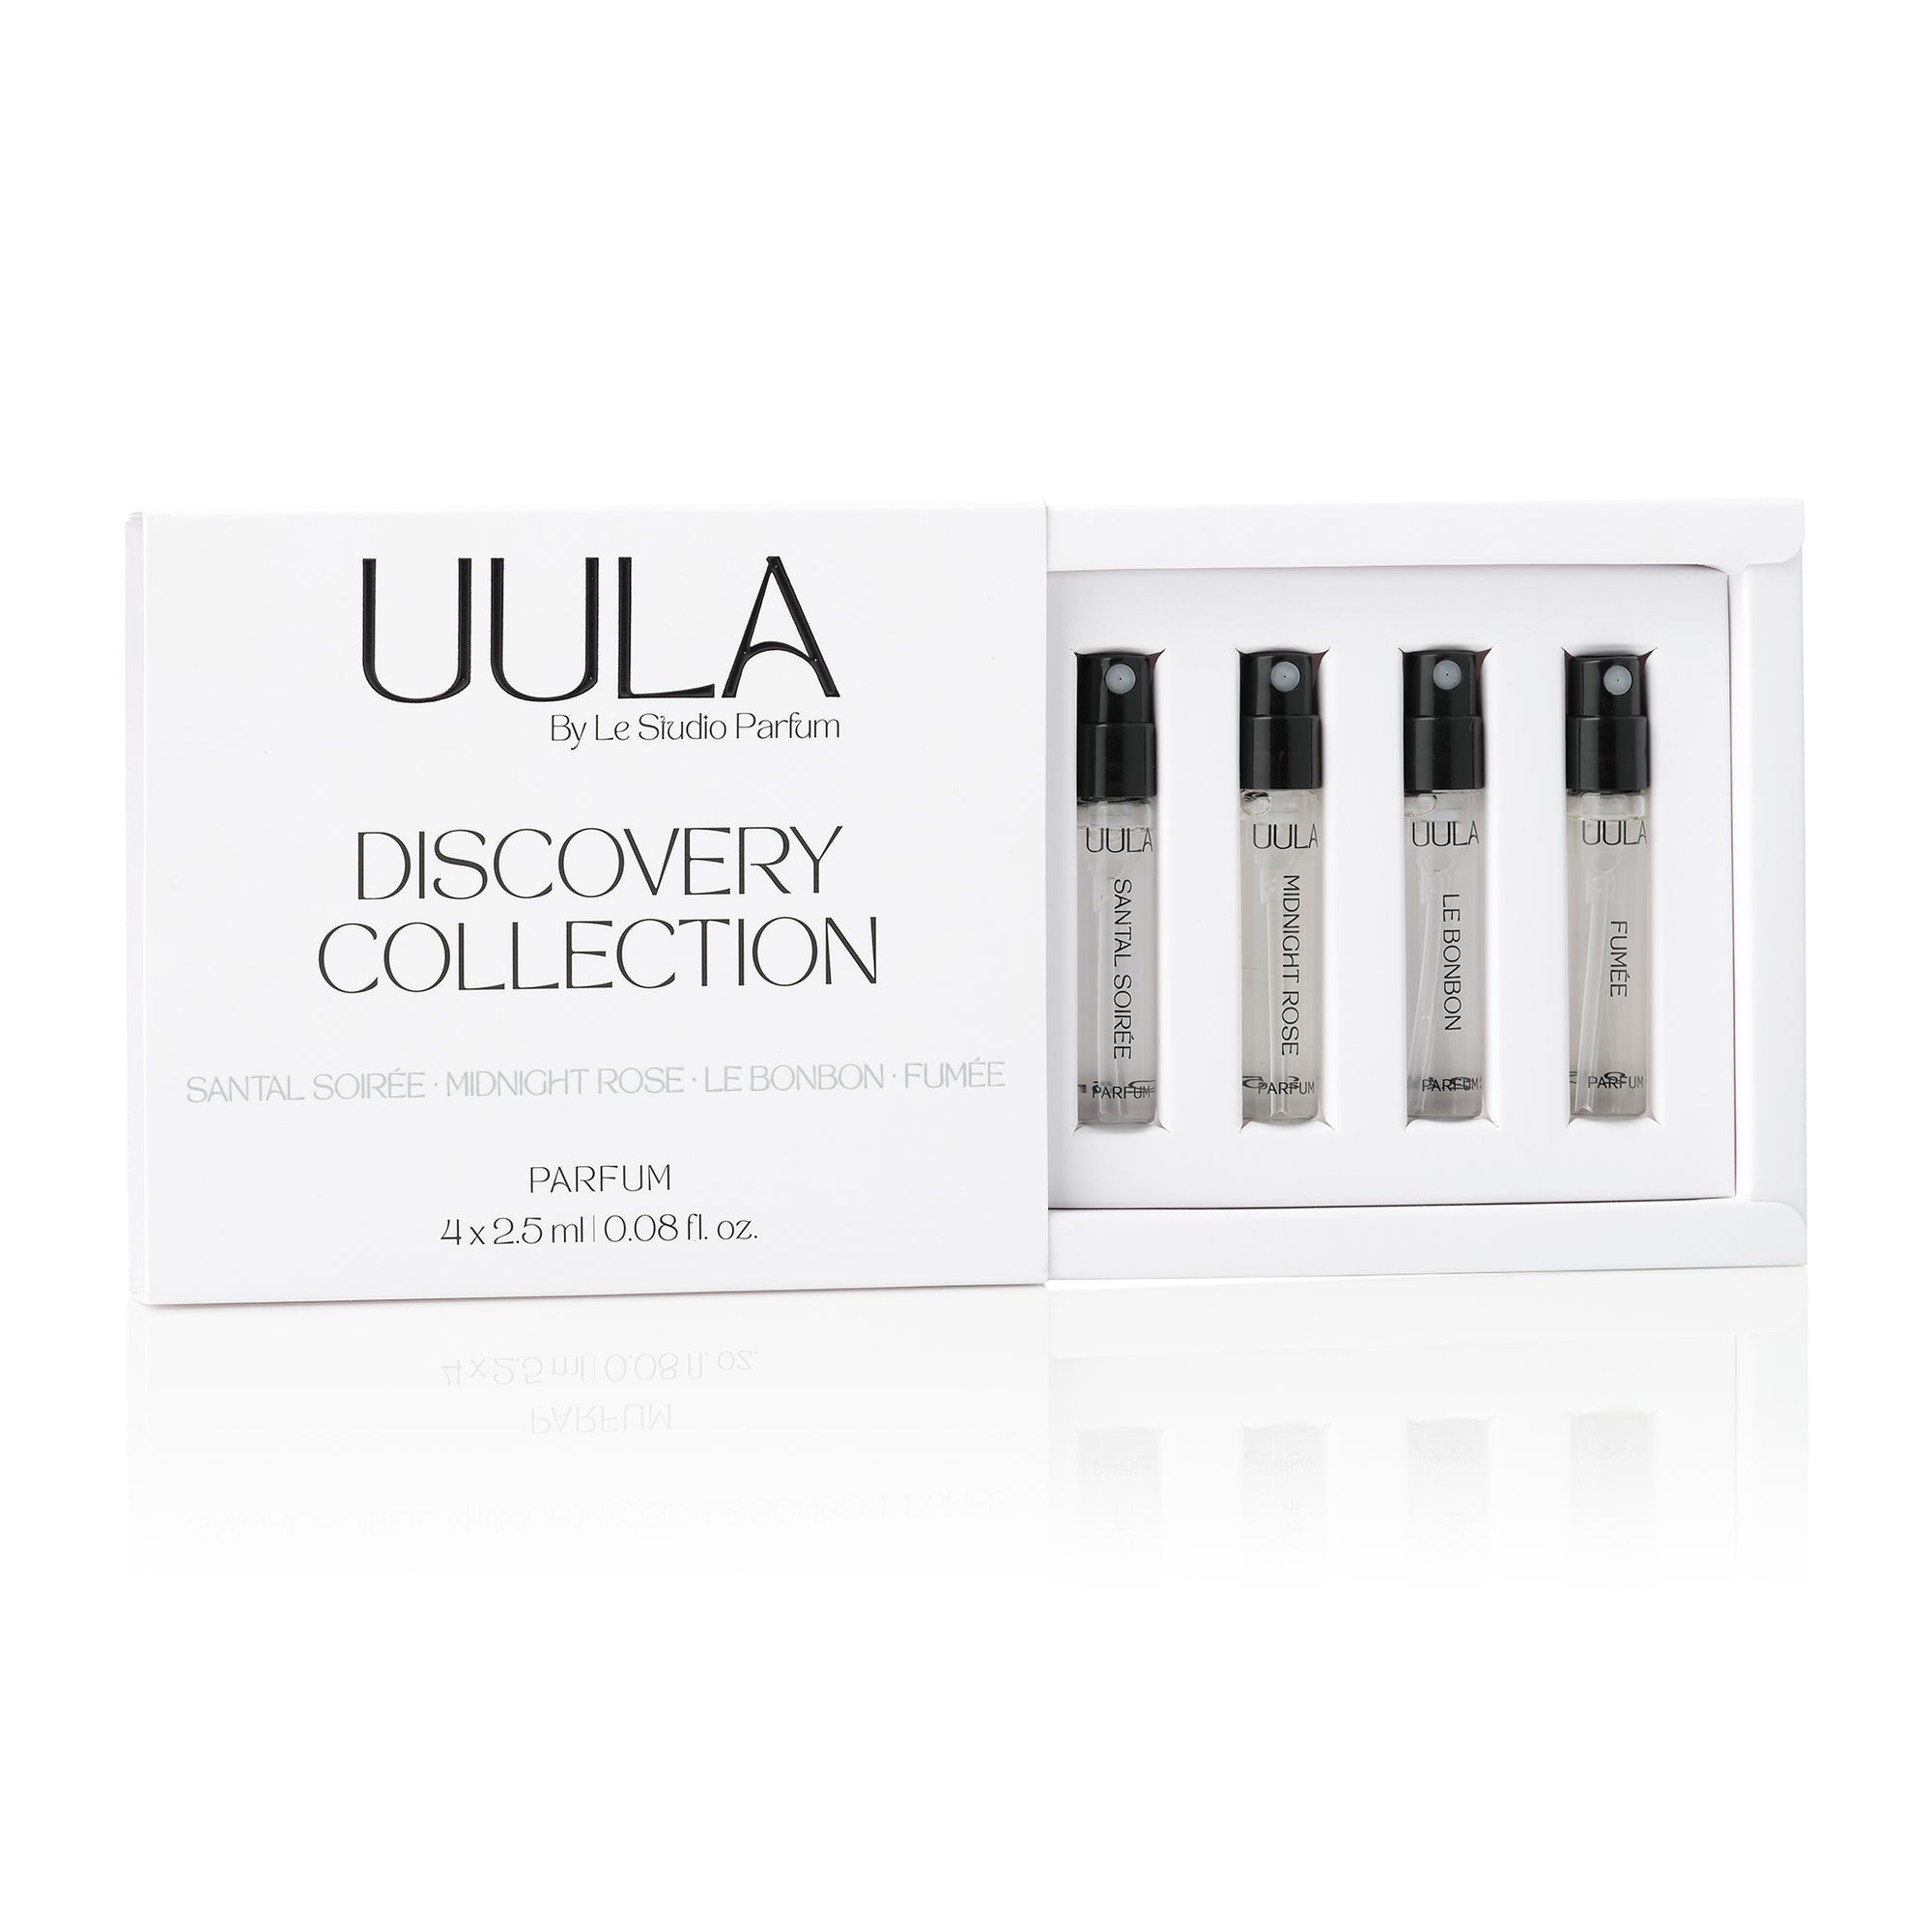 2.5ml vials and discovery collection box of the UULA fragrance range